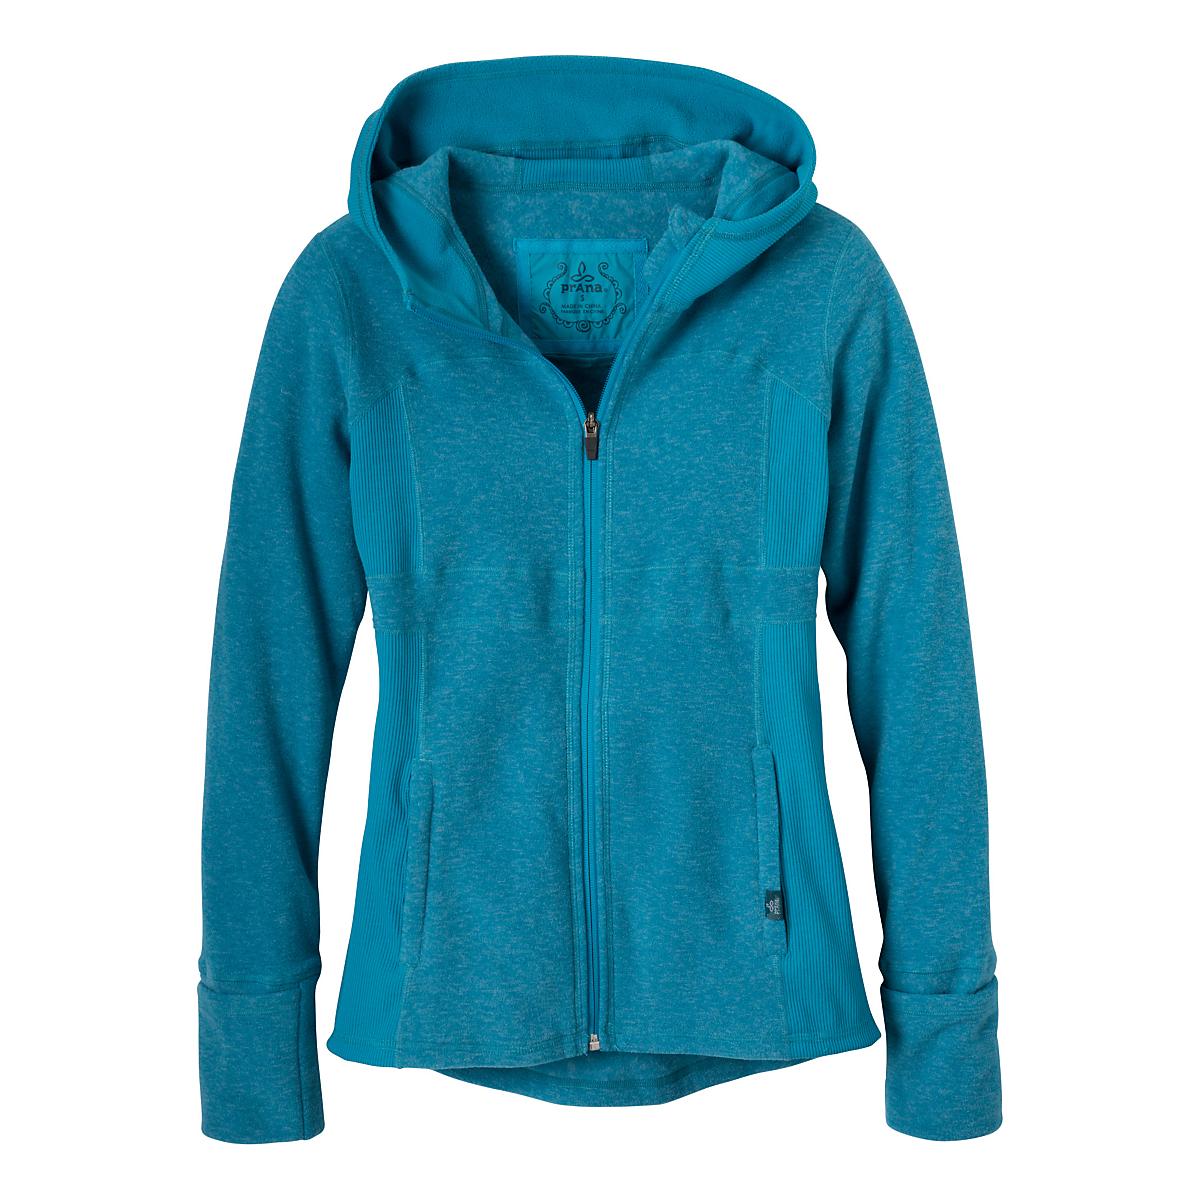 Womens R-Gear Zip To It Running Jackets at Road Runner Sports